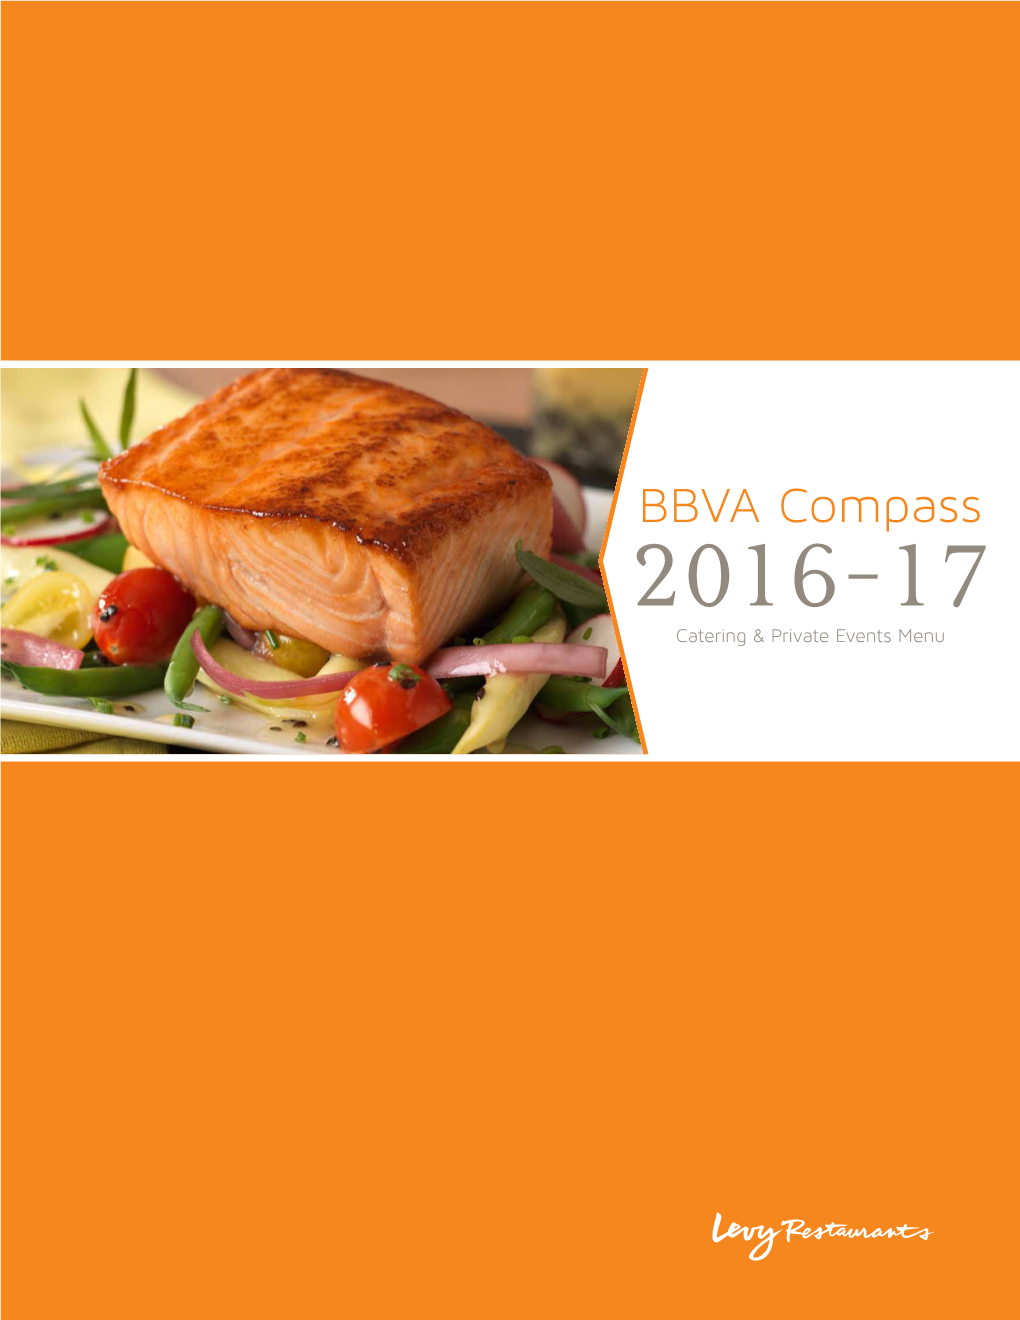 BBVA Compass 2016-17 Catering & Private Events Menu Your Chef